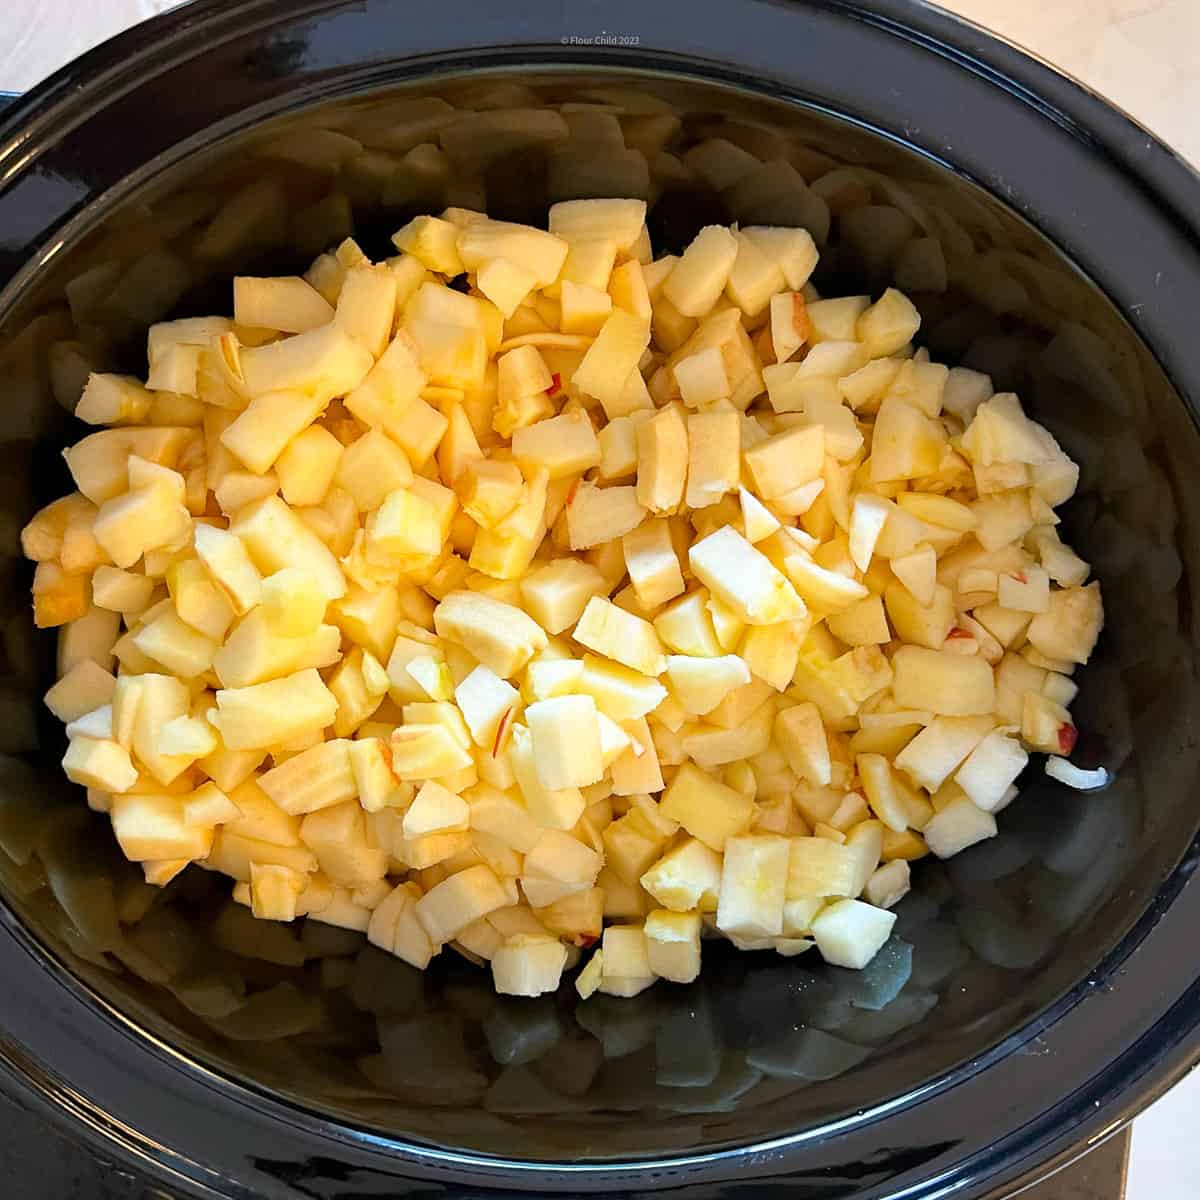 Apples in crockpot after they have been peeled, cored and diced.